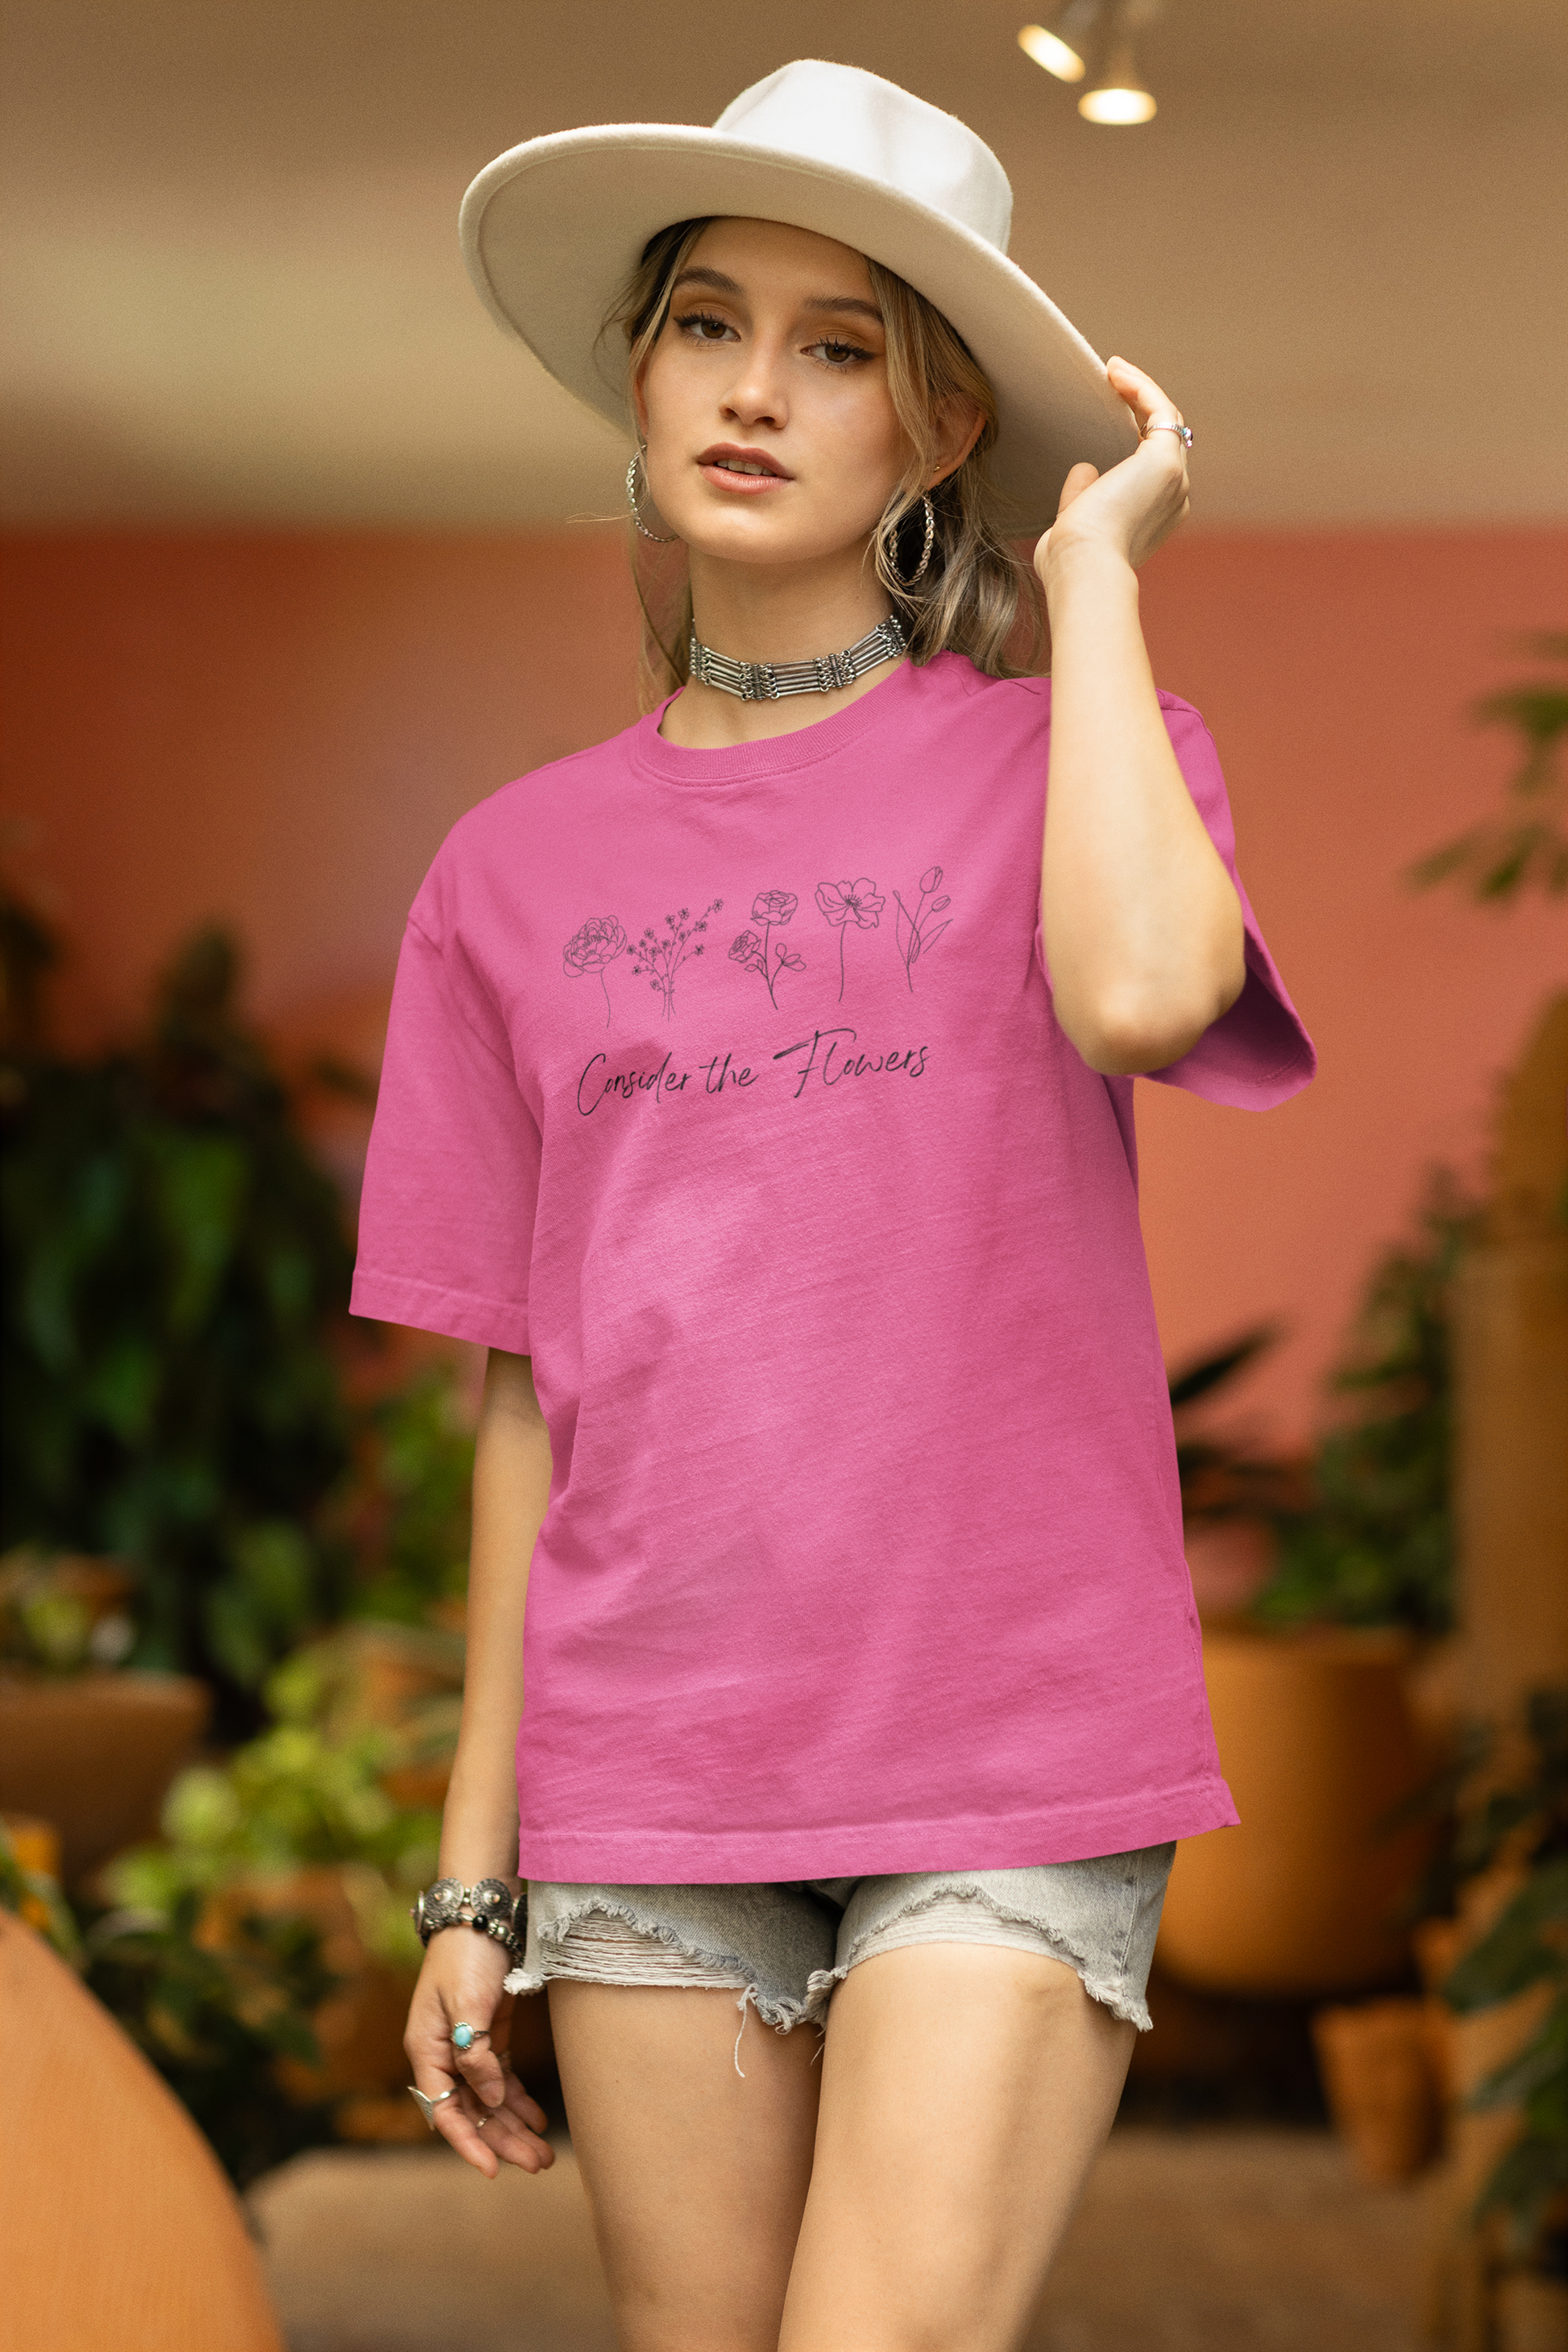 Floral Graphic Tee - Christian T Shirt for Women - Small Charity Pink